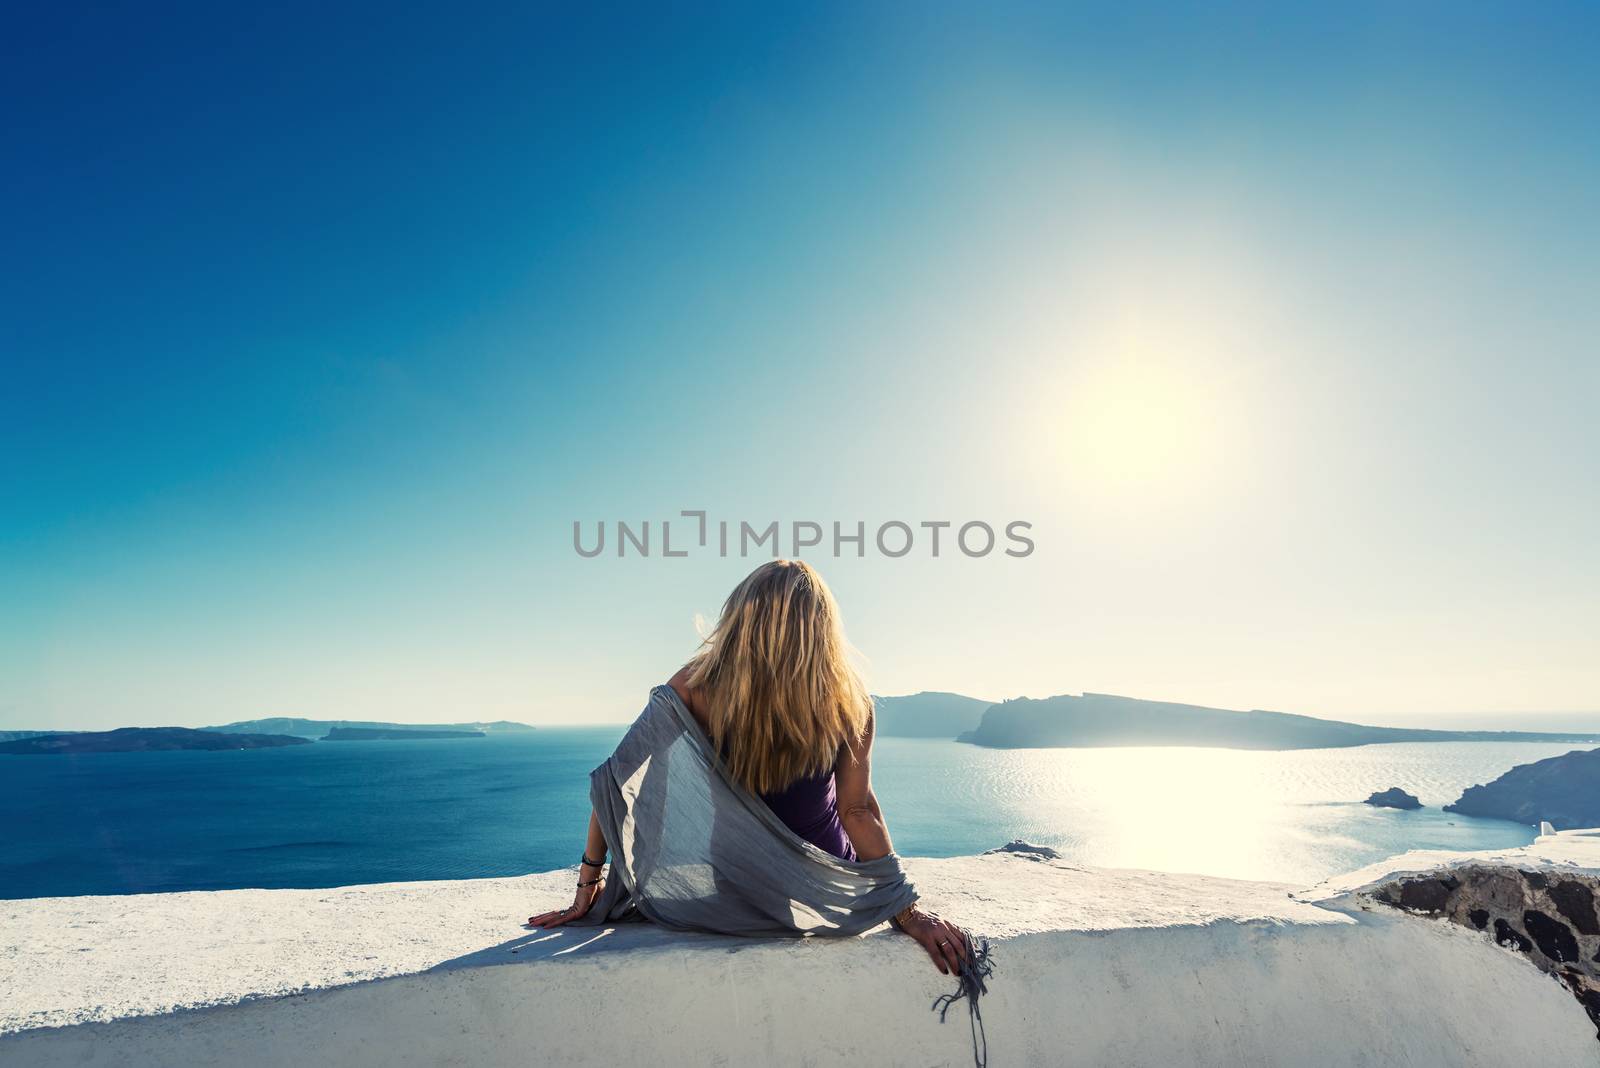 Luxury travel vacation woman looking at view on Santorini island in Greece. Amazing view of sea and Caldera.